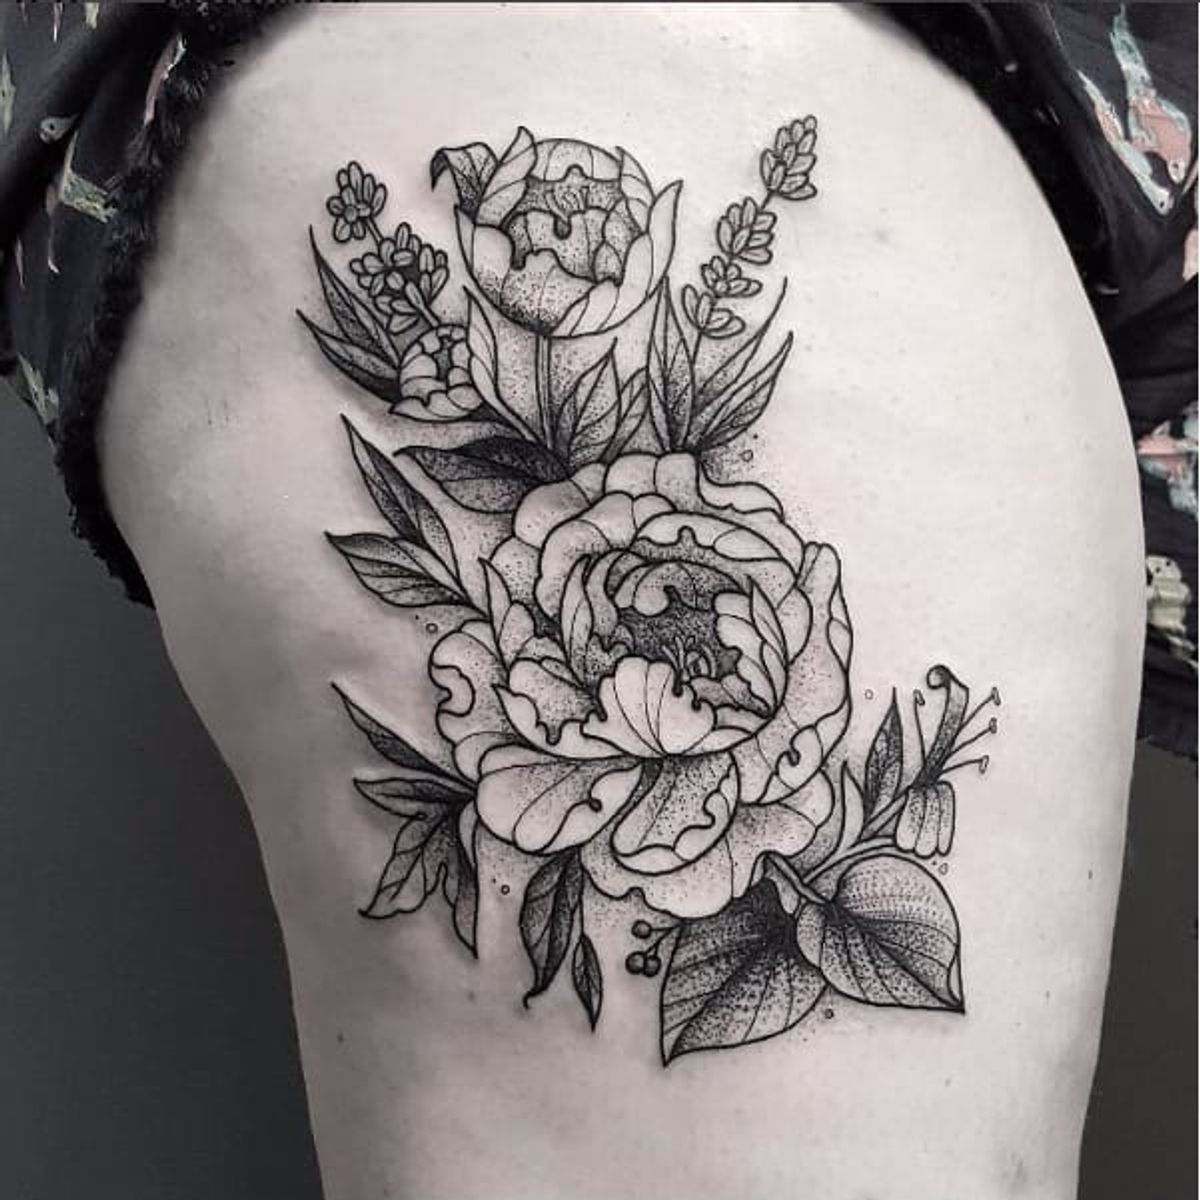 Tattoo uploaded by JenTheRipper • Sweet floral tattoo by Cutty Bage # ...